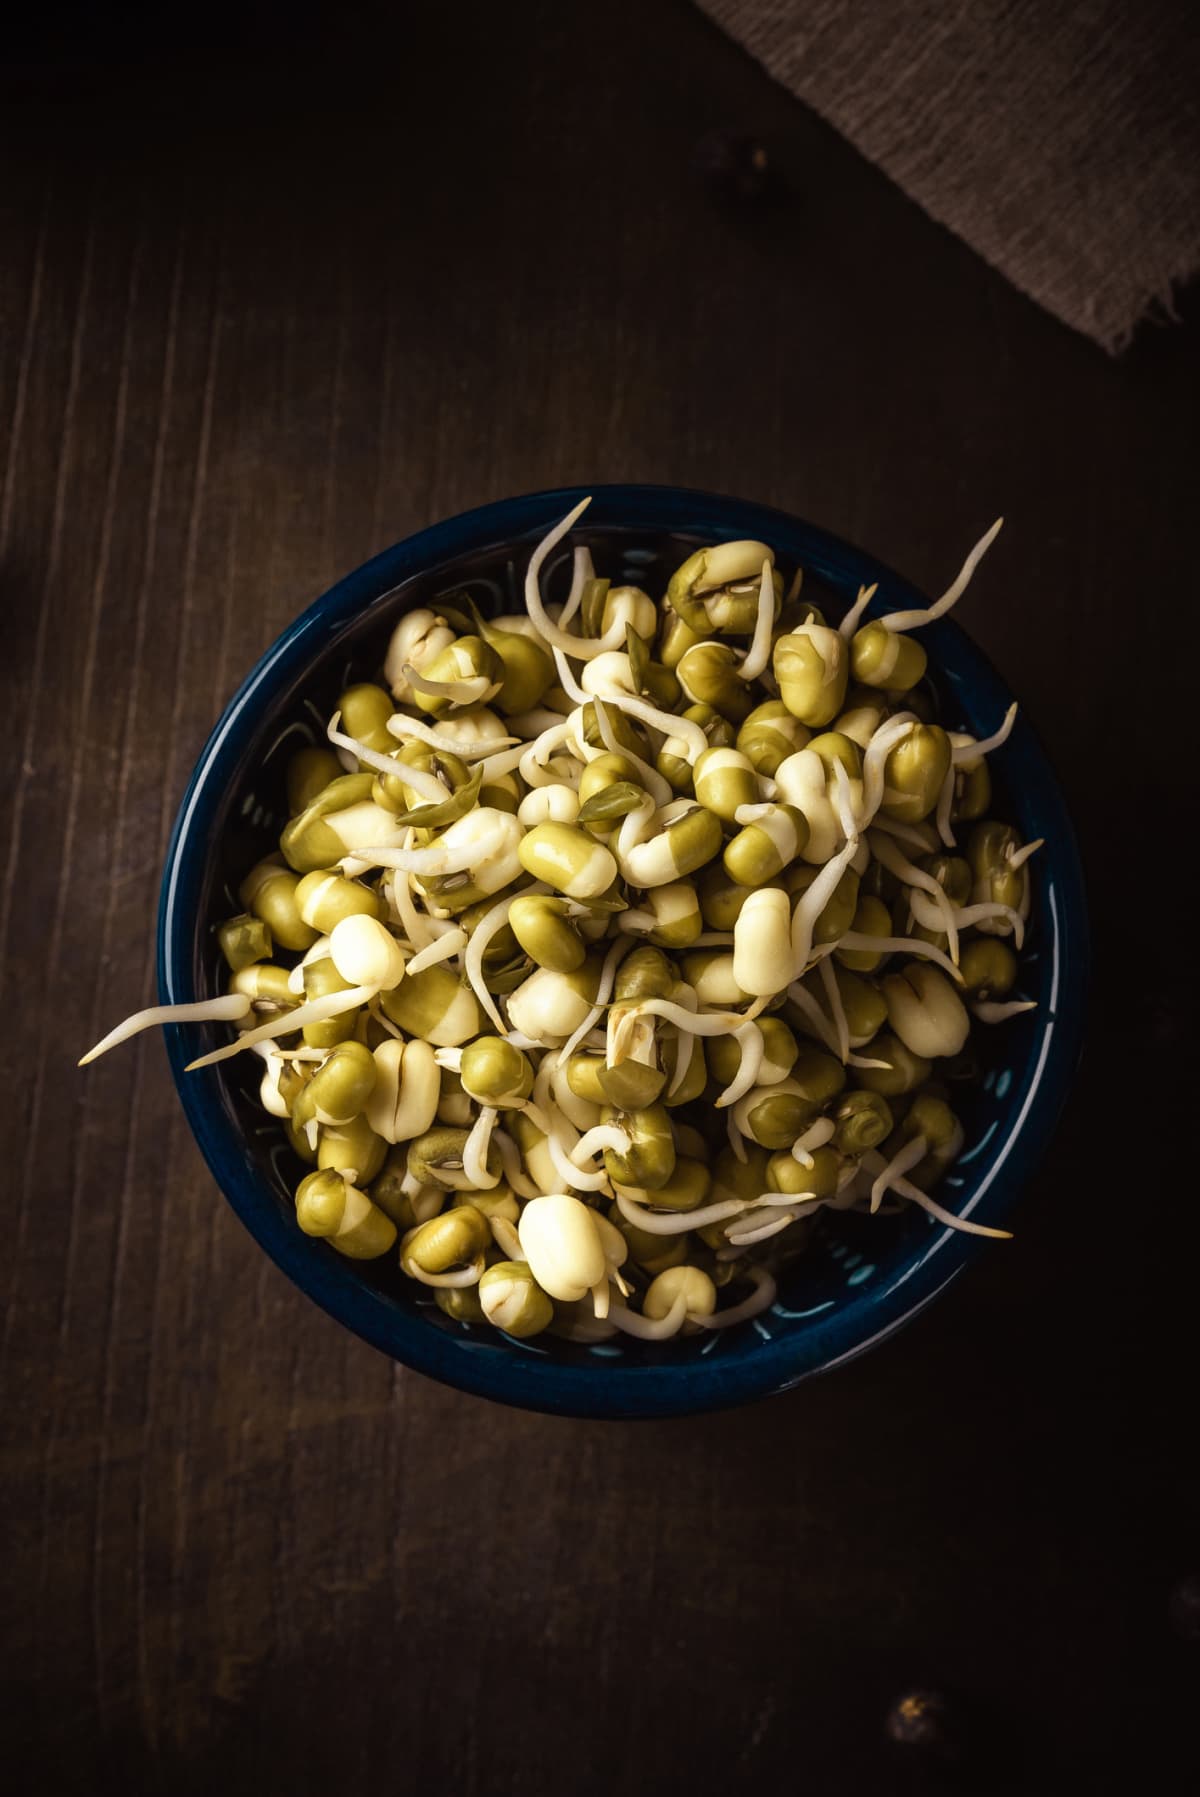 Vertical photo with top view on blue bowl full of mung bean sprouts. Bowl is placed on dark brown vintage board. Sprouts have green and white color.